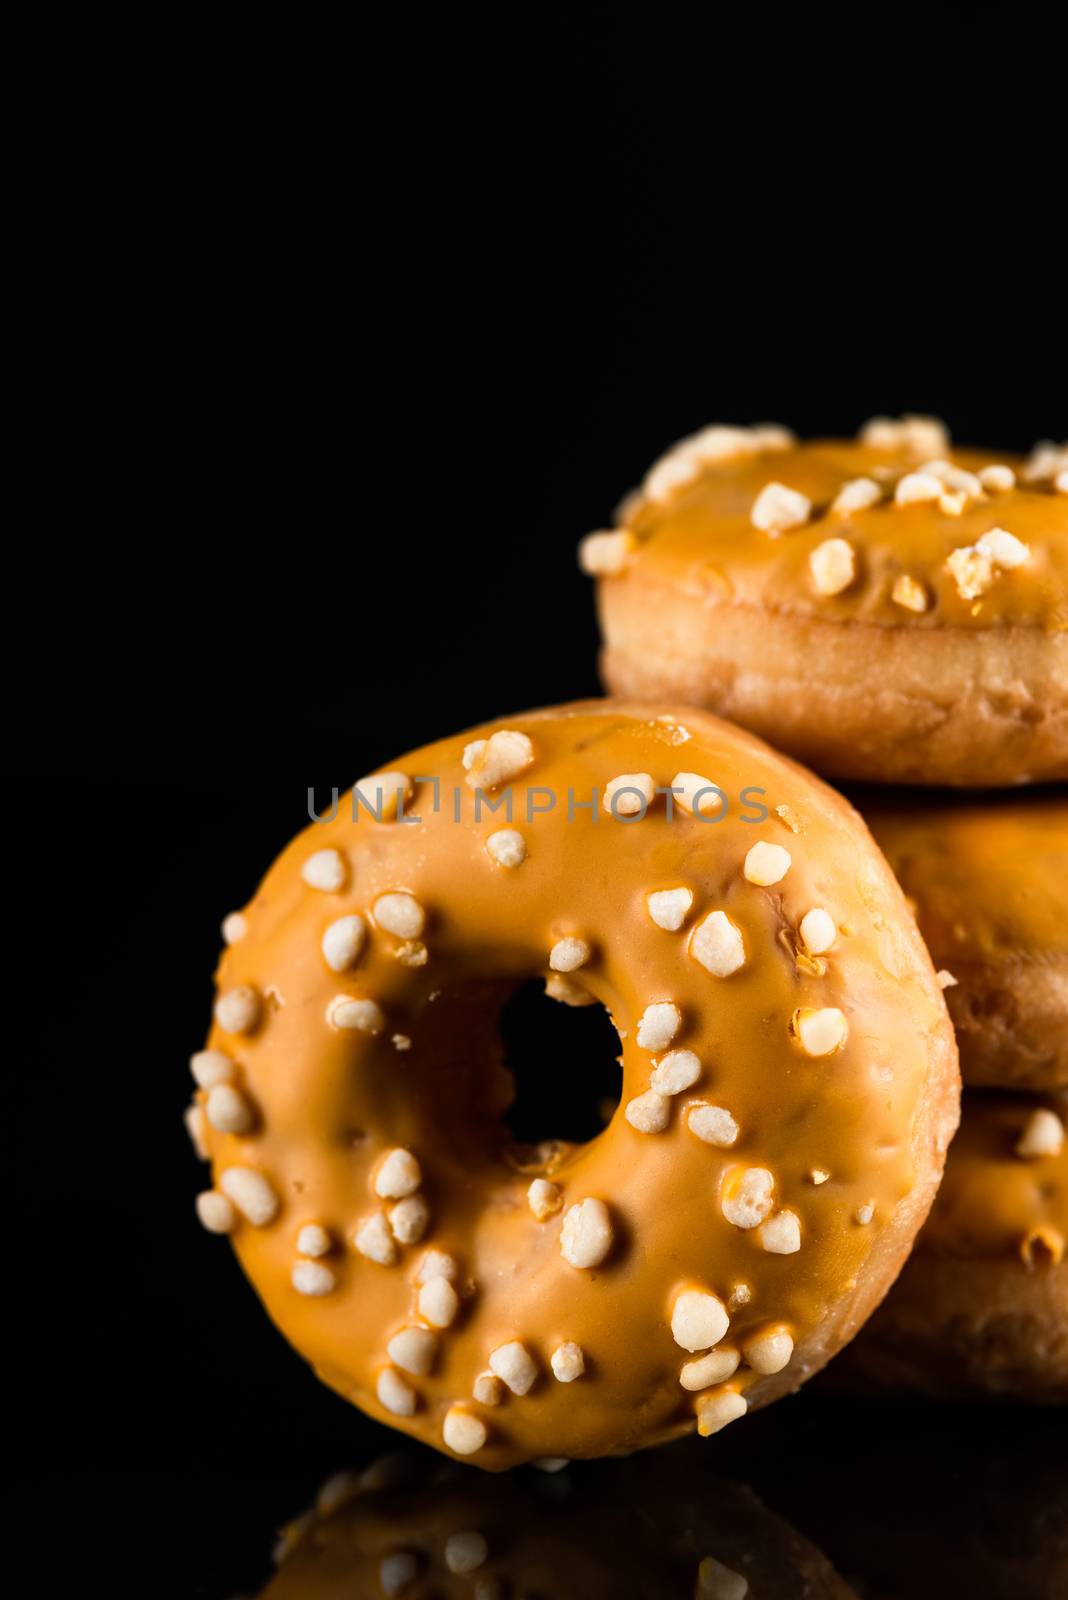 Salted Caramel Donuts or Doughnuts Tower on Dark Background. Cop by merc67